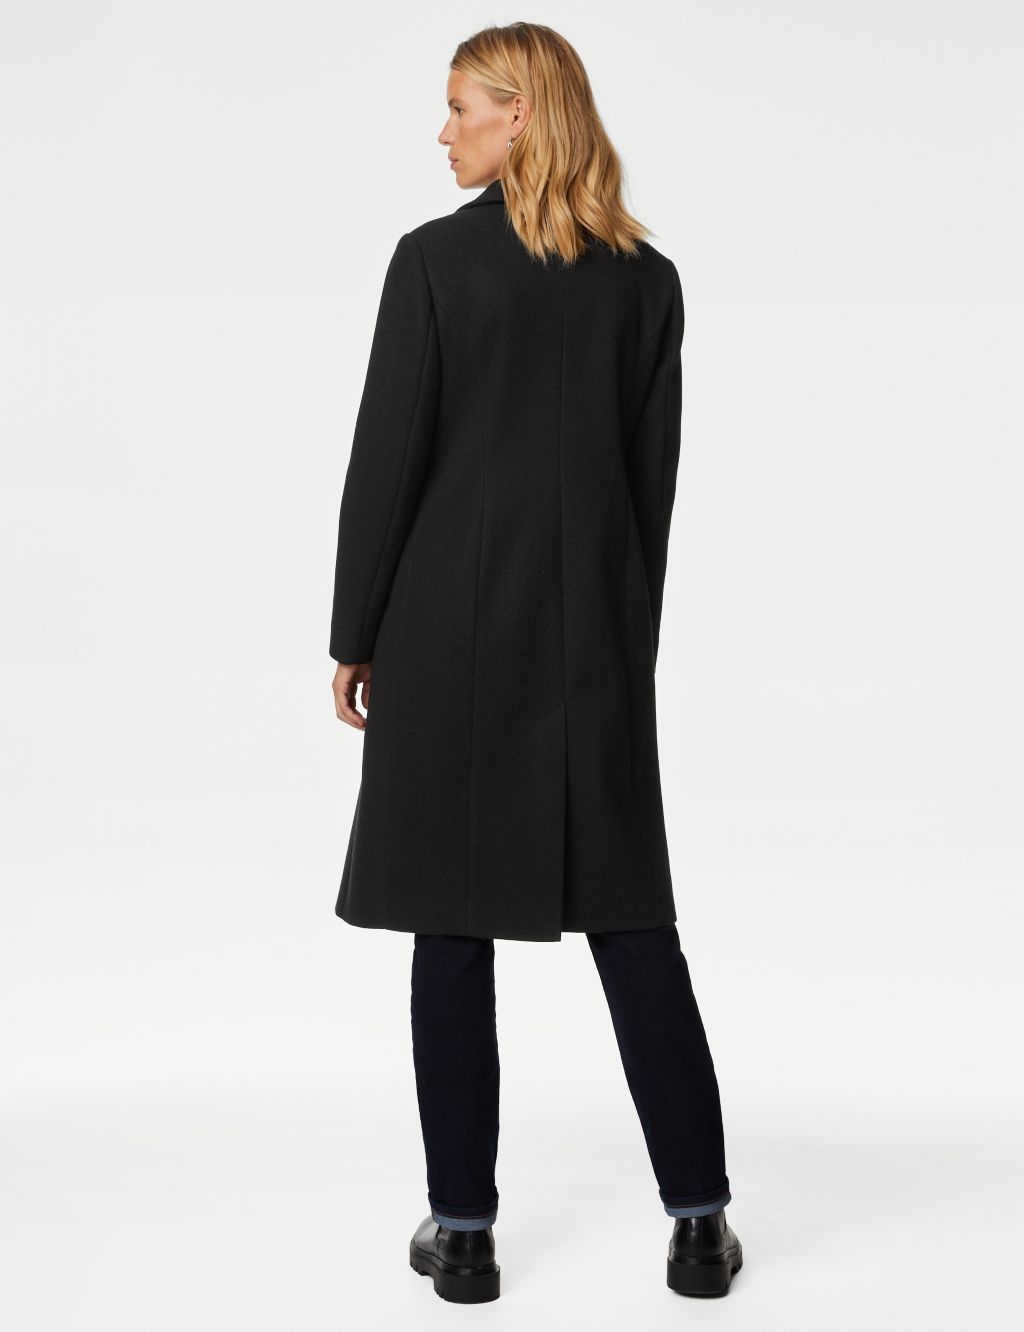 Double Breasted Longline Tailored Coat image 6